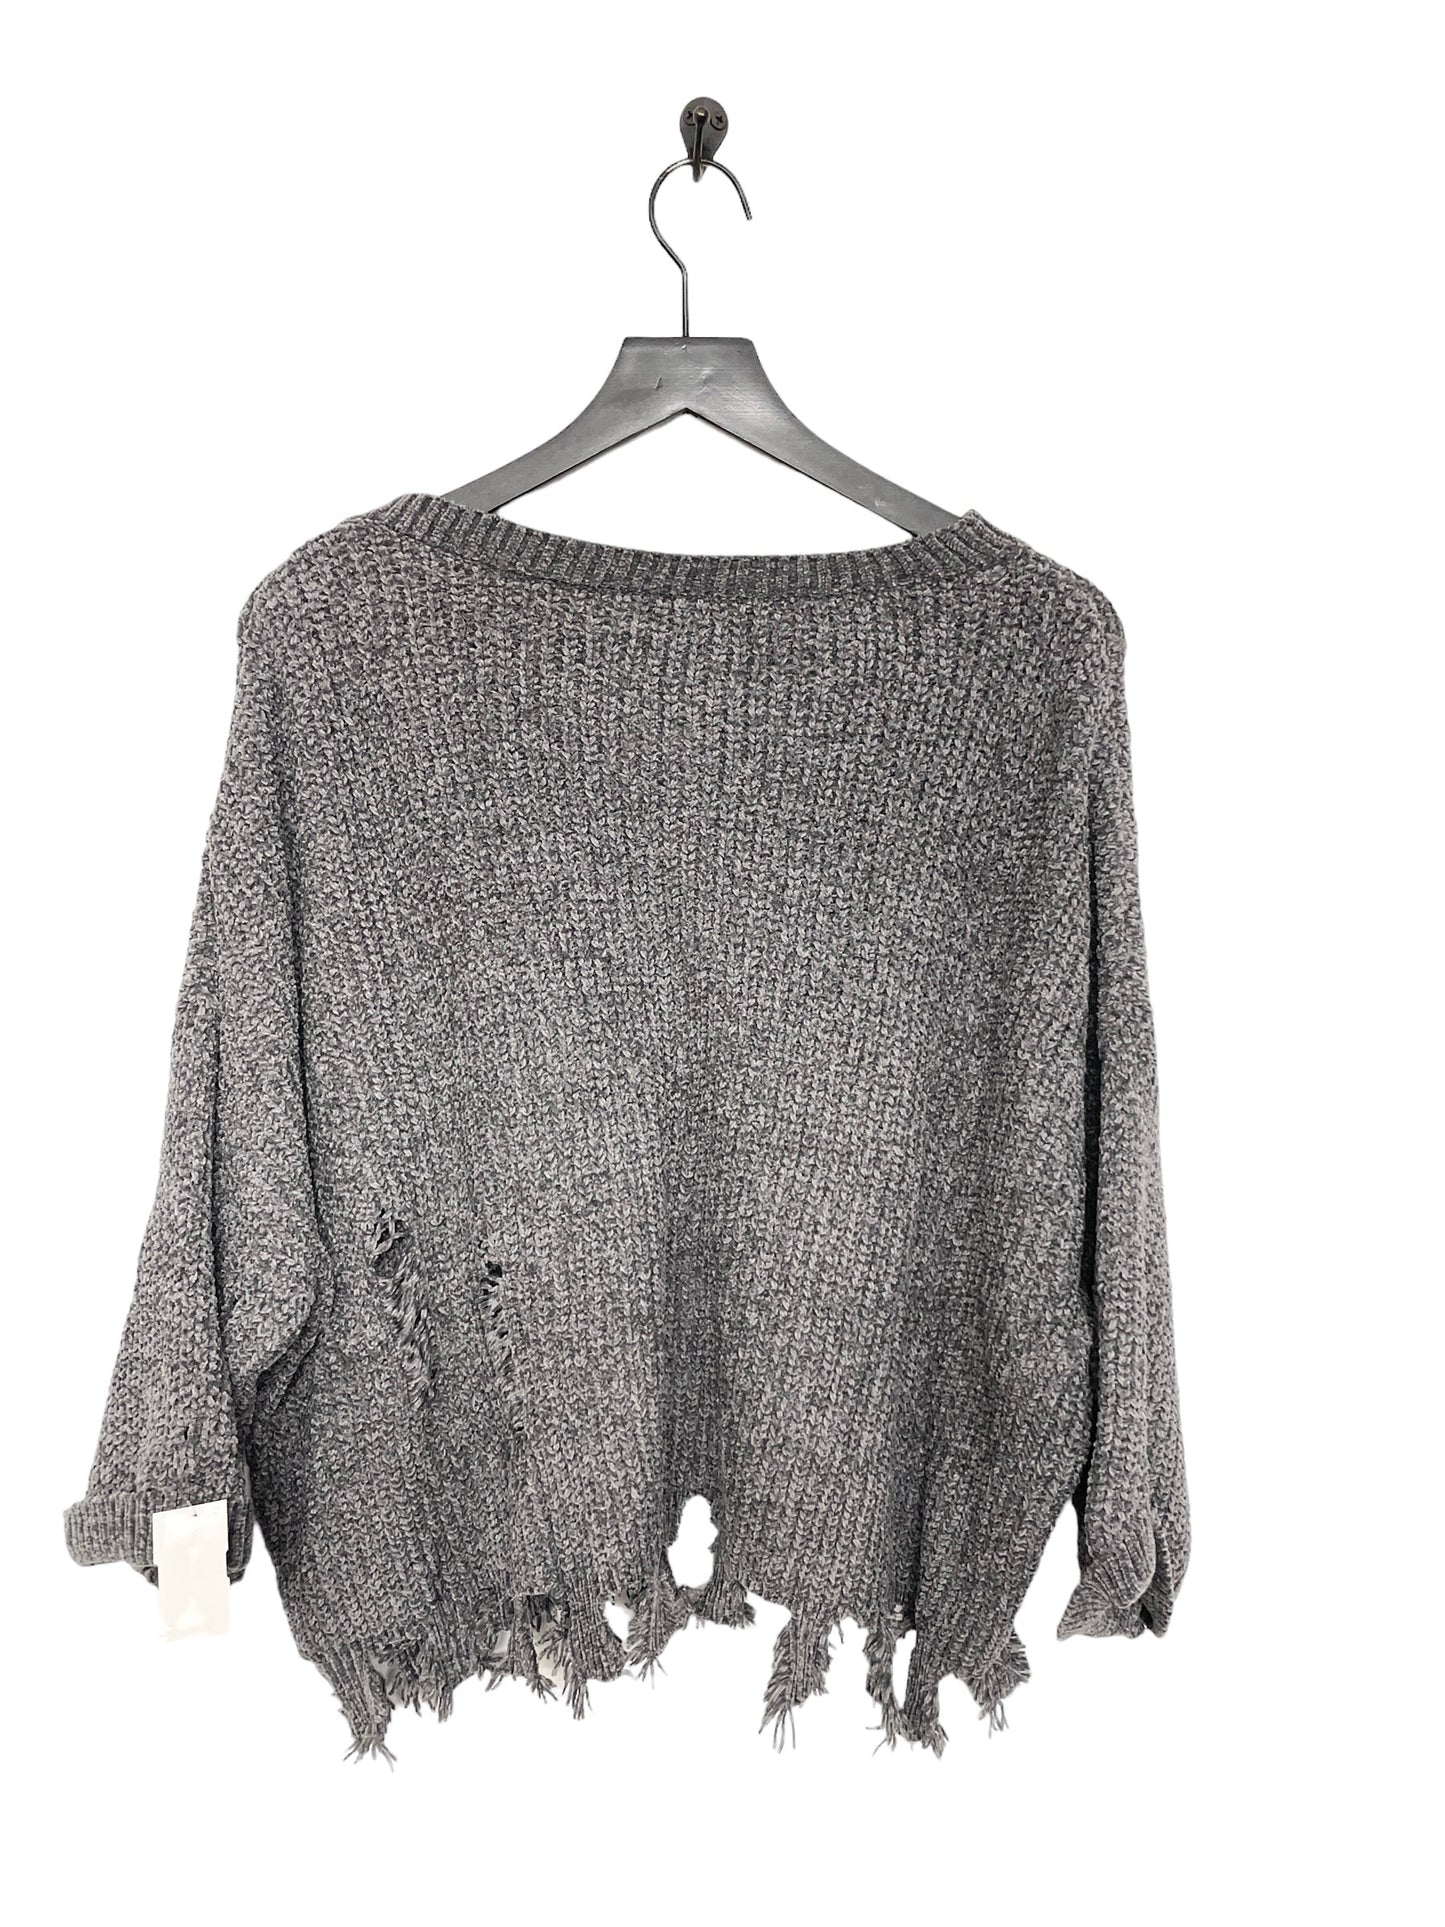 Grey Sweater Clothes Mentor, Size M